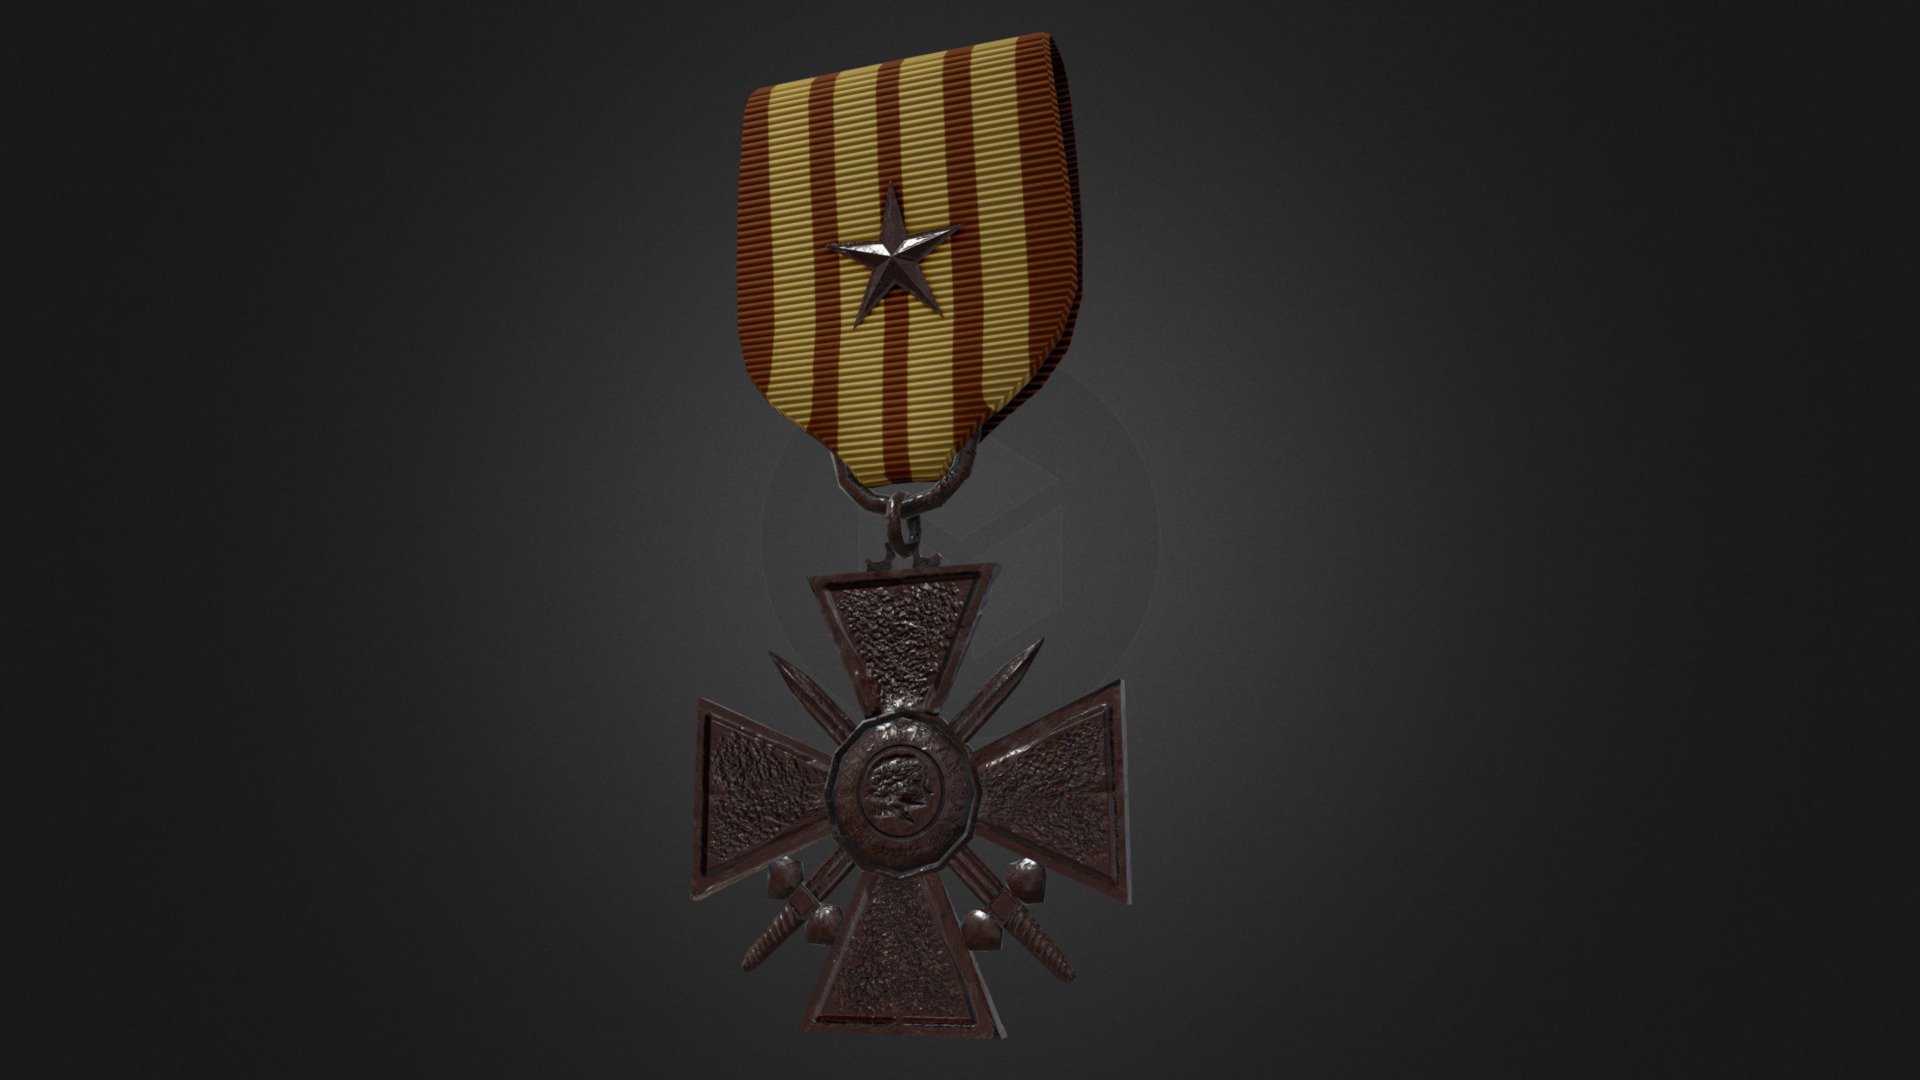 One of three (and the hardest) commission pieces done for Second Life. Always open for quotes

First time properly using Substance Painter - Croix De Guerre 1939, given to brave souls who fought along side the allies during WW2.

Some areas aren't as accurate as I'd like them to be due to having to work around an issue in photoshop (had to mess about with the UV a little, so there's a tiny bit of weirdness). That said, this has been an important breakthrough in my workflow and I've finally entered the realm of PBR.

Whilst I do own (and quite like) Quixel, its shortcomings are mostly performance based, whereas Substance does very well in this case. The thing with Substance is pinpoint accuracy is at a loss along with important things like proper brush scaling on both U and V. I've yet to check out the latest version of Substance though. A better PC might also be in order! - [Commission] Croix De Guerre 1939 Medal - 3D model by zoxin 3d model